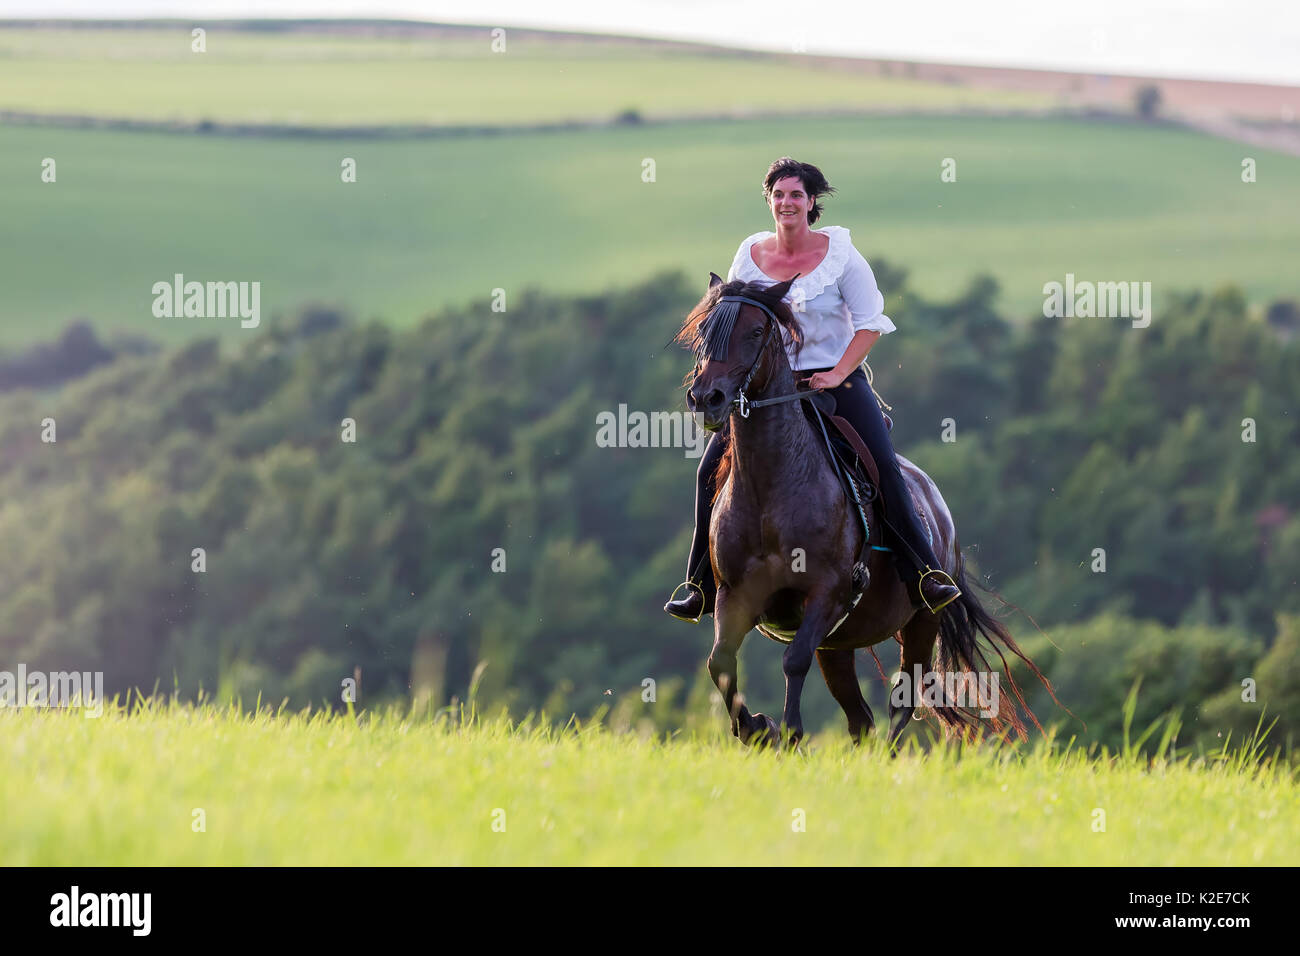 mature woman riding an Andalusian horse in a country landscape Stock Photo